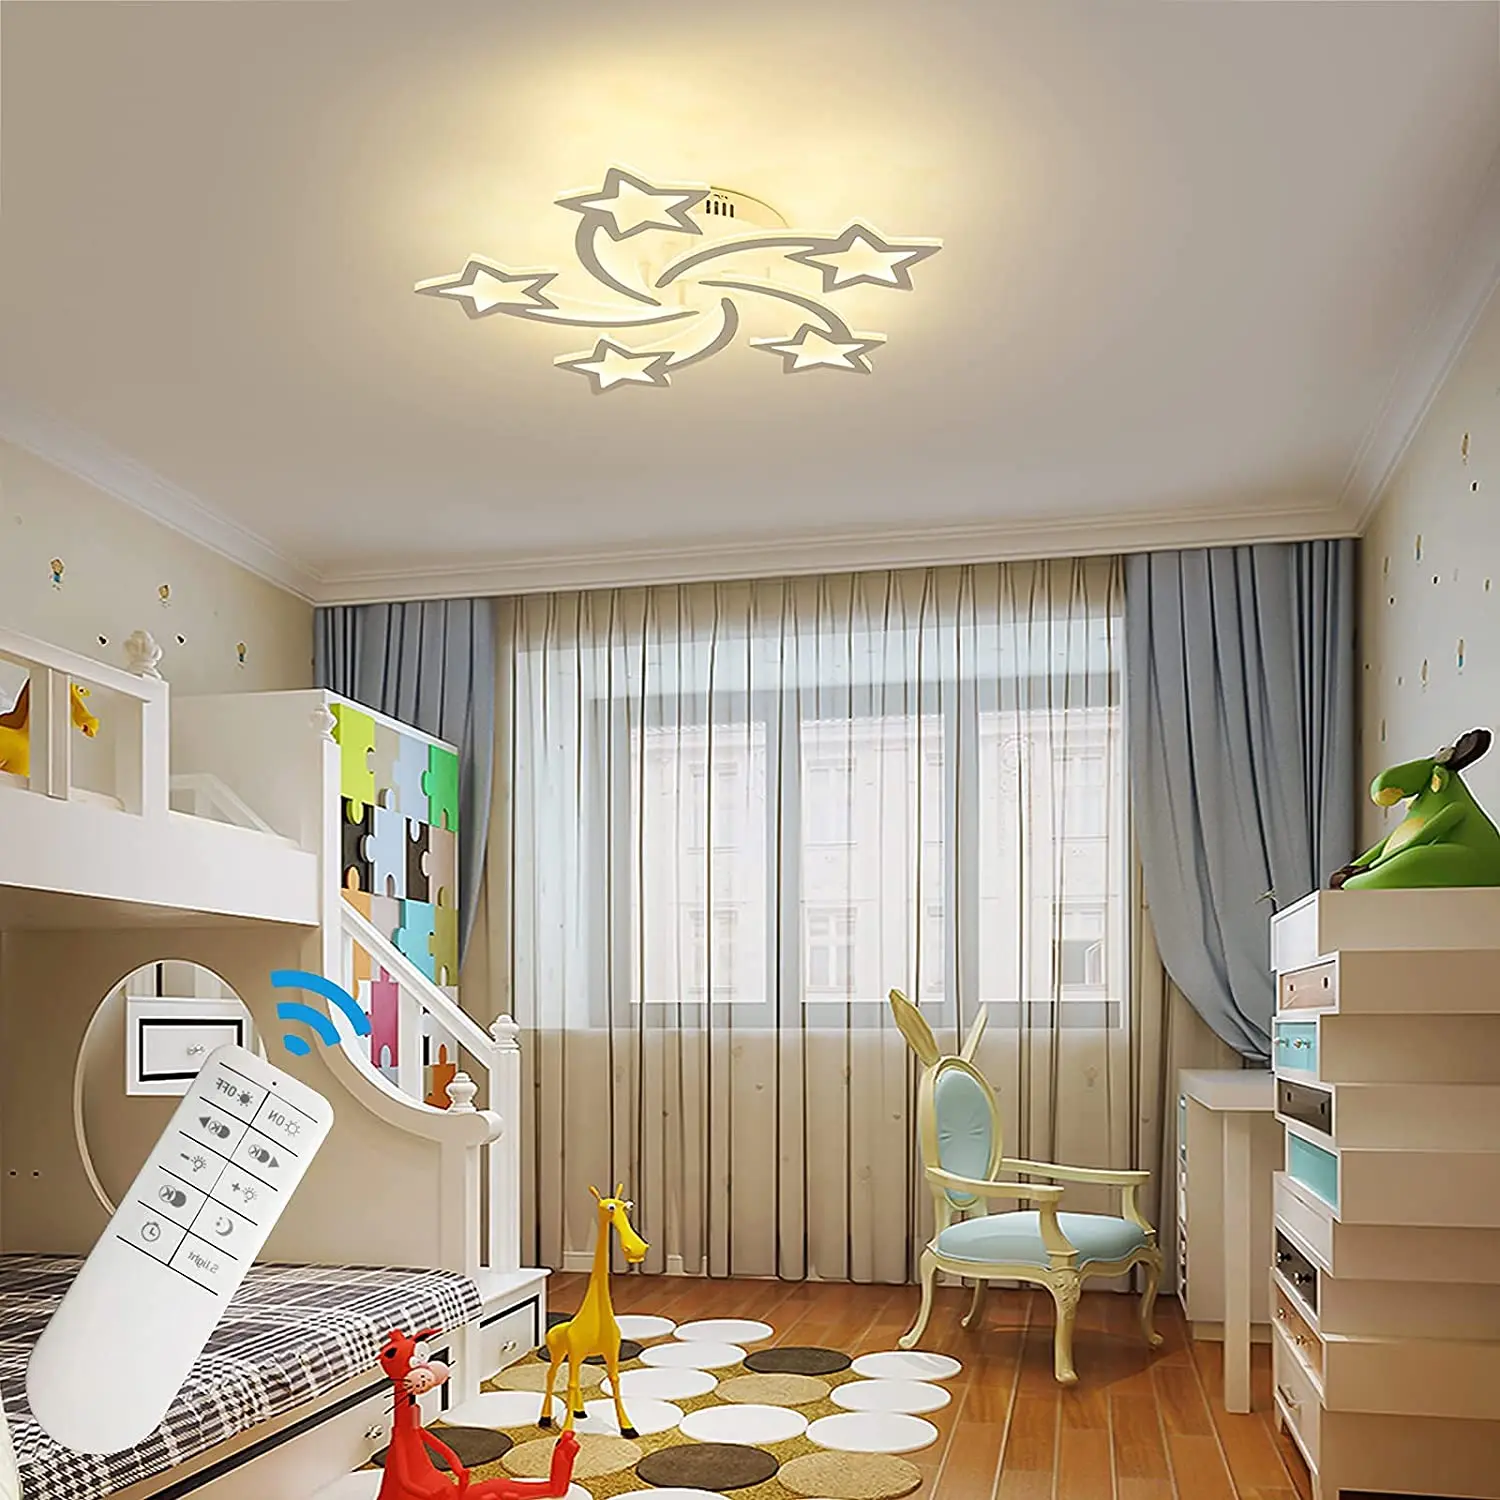 

Dimmable Led Ceiling Light 60w Modern Acrylic Ceiling Light, 5-Star Shape Chandelier Lighting Children’s Room Remote Control